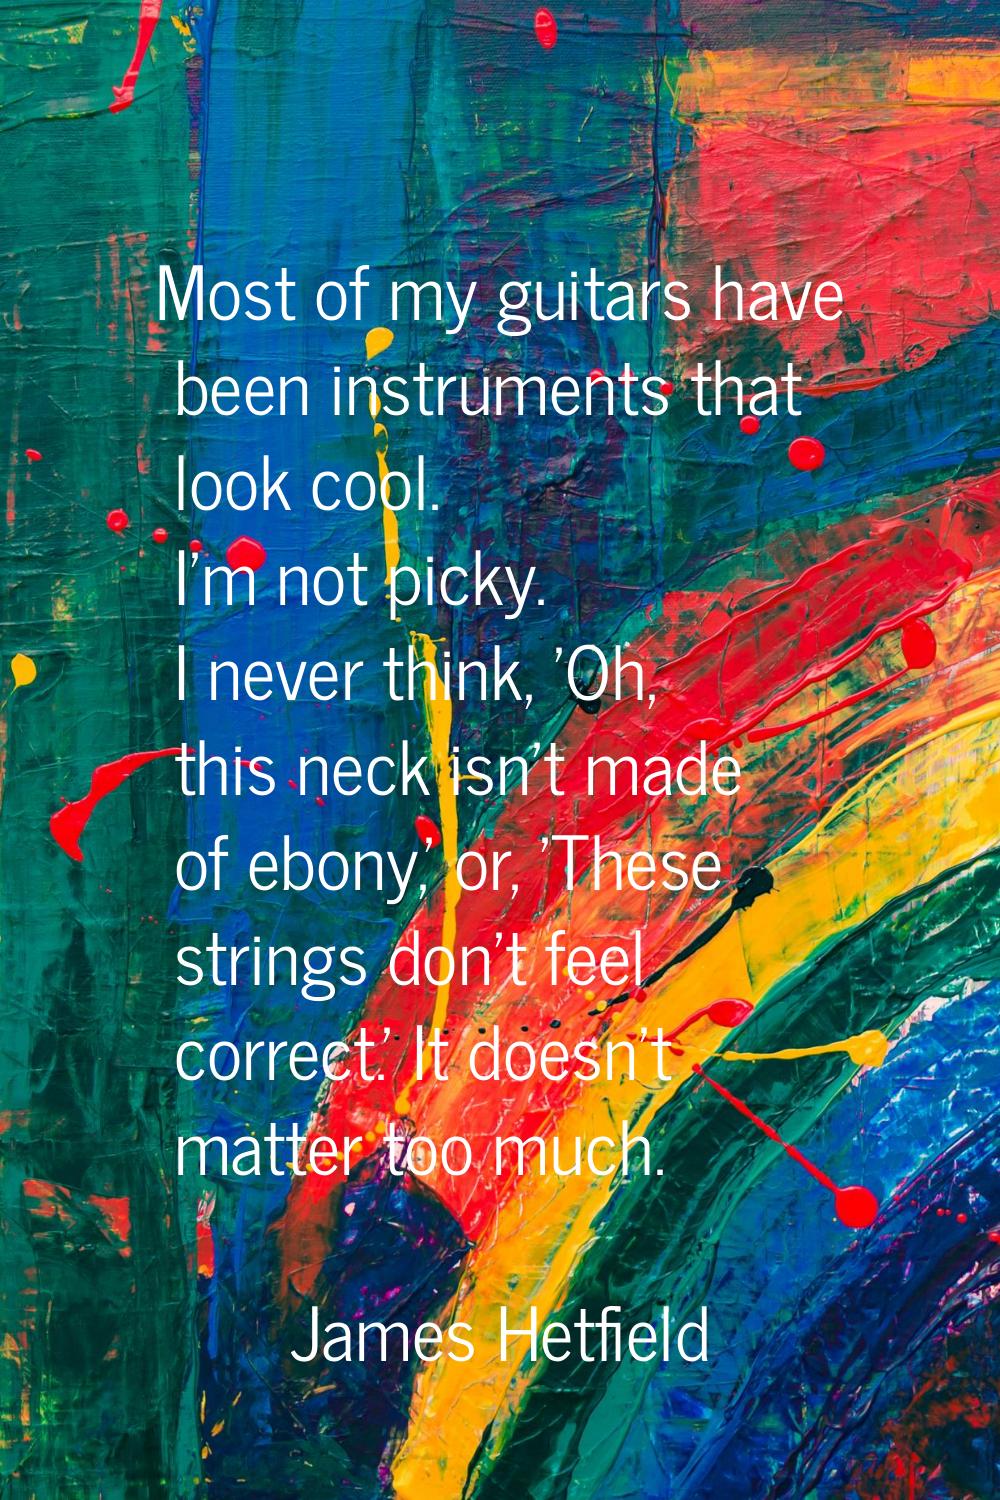 Most of my guitars have been instruments that look cool. I'm not picky. I never think, 'Oh, this ne